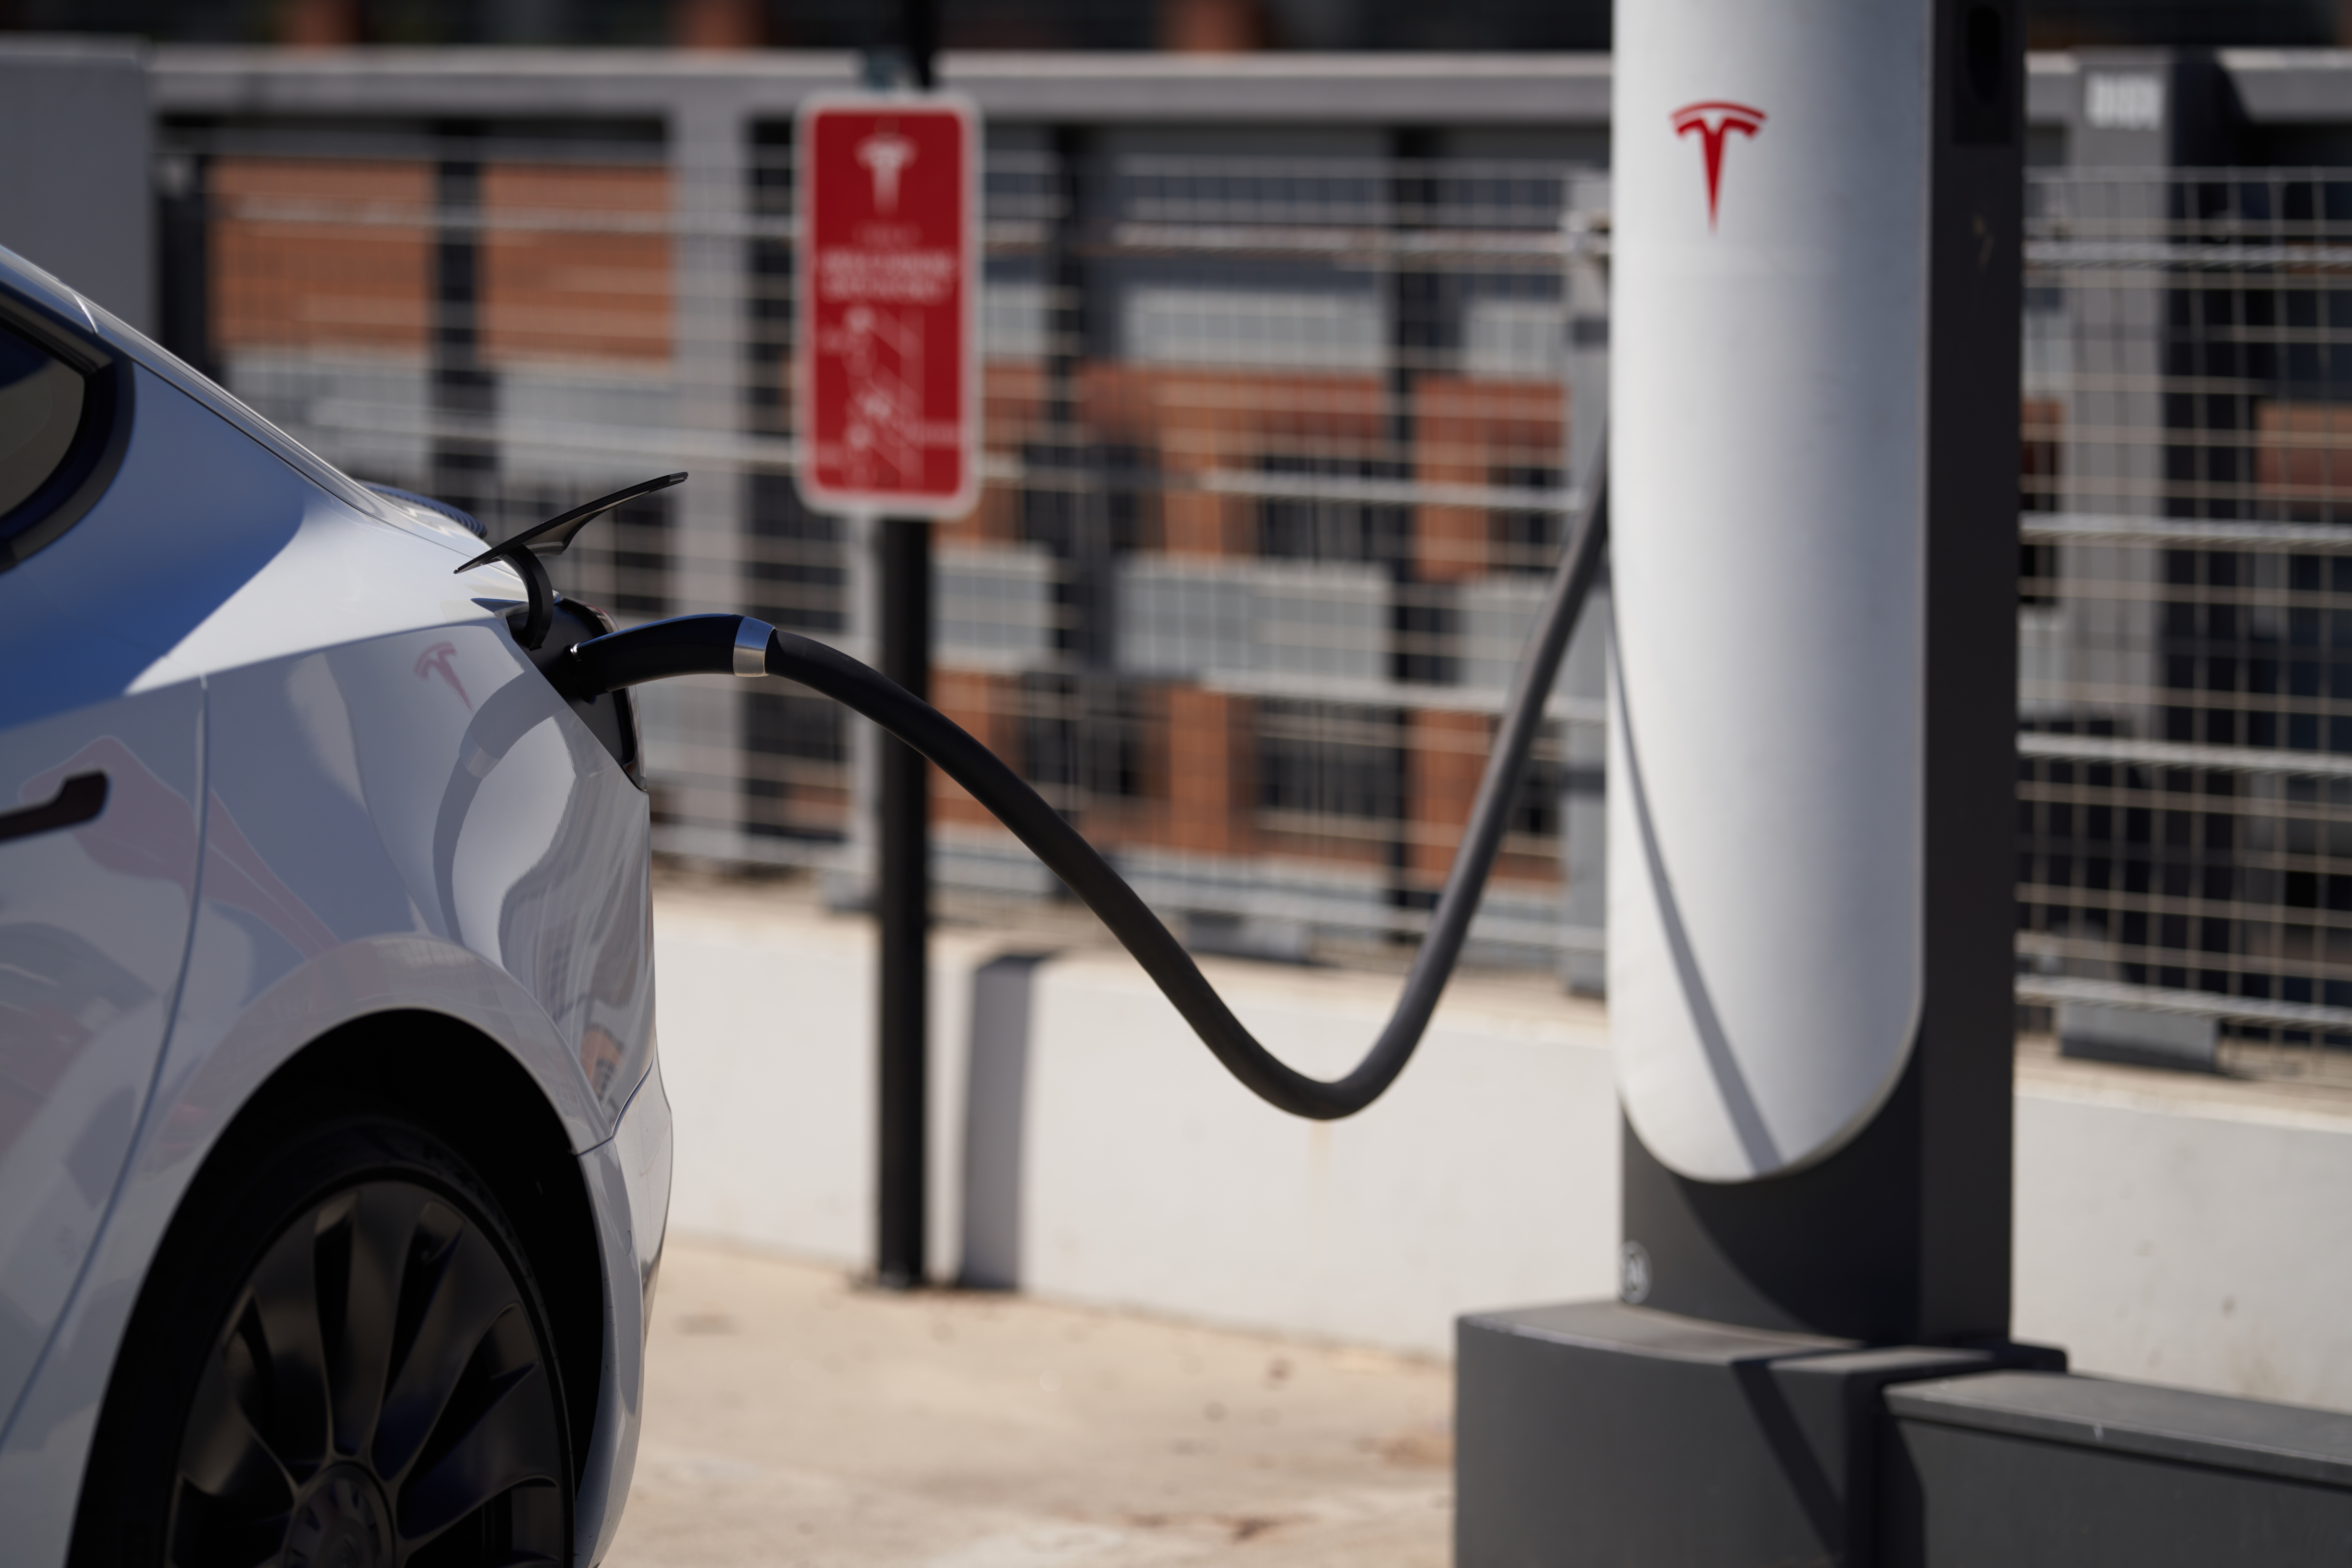 A Tesla vehicle is plugged into a Tesla charging station in a parking lot on September 22, 2022 in ...